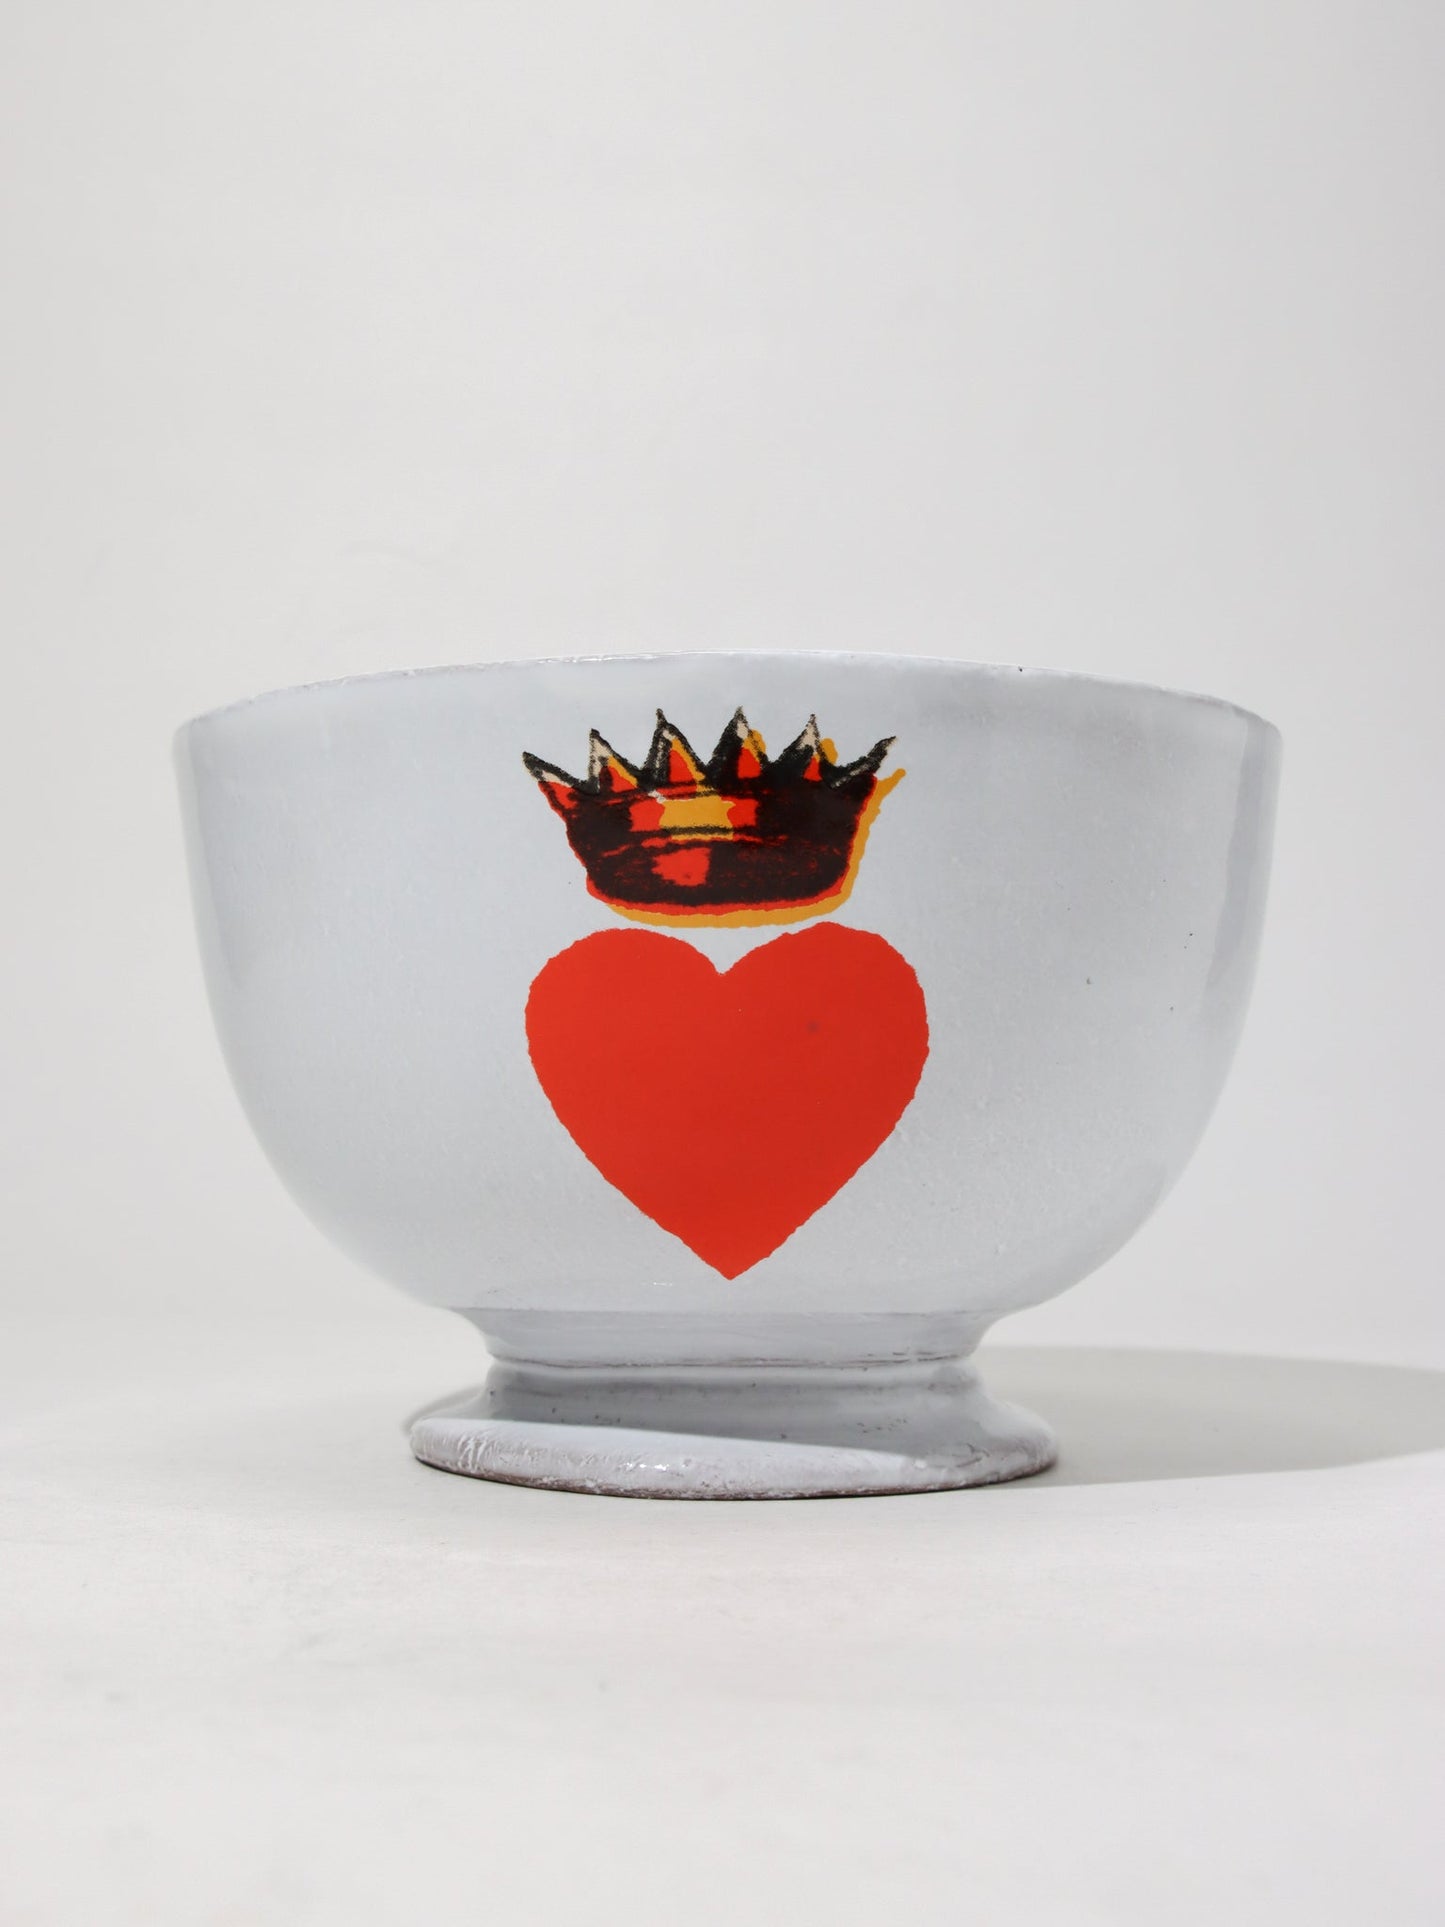 Heart with Crown ボウル 15cm